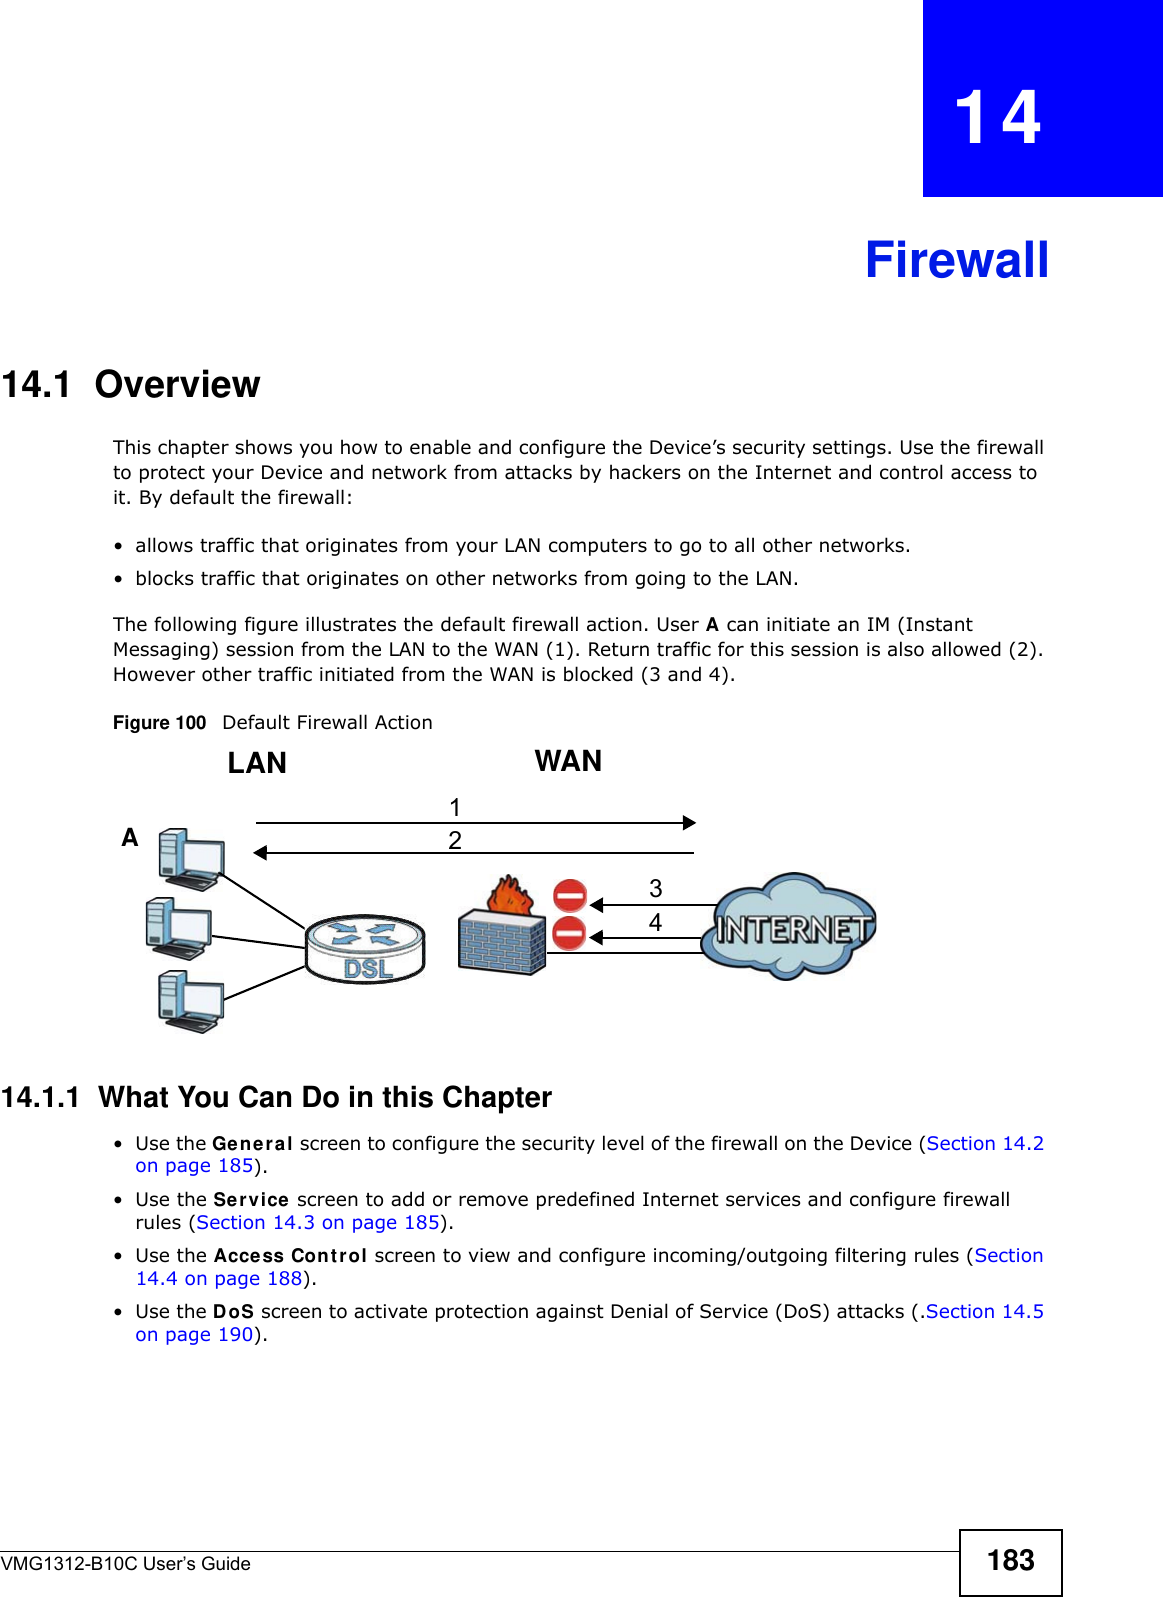 VMG1312-B10C User’s Guide 183CHAPTER   14Firewall14.1  OverviewThis chapter shows you how to enable and configure the Device’s security settings. Use the firewall to protect your Device and network from attacks by hackers on the Internet and control access to it. By default the firewall:• allows traffic that originates from your LAN computers to go to all other networks. • blocks traffic that originates on other networks from going to the LAN. The following figure illustrates the default firewall action. User A can initiate an IM (Instant Messaging) session from the LAN to the WAN (1). Return traffic for this session is also allowed (2). However other traffic initiated from the WAN is blocked (3 and 4).Figure 100   Default Firewall Action14.1.1  What You Can Do in this Chapter•Use the Gener a l screen to configure the security level of the firewall on the Device (Section 14.2 on page 185).•Use the Ser vice screen to add or remove predefined Internet services and configure firewall rules (Section 14.3 on page 185).•Use the Access Cont rol screen to view and configure incoming/outgoing filtering rules (Section 14.4 on page 188). •Use the DoS screen to activate protection against Denial of Service (DoS) attacks (.Section 14.5 on page 190).WANLAN3412A